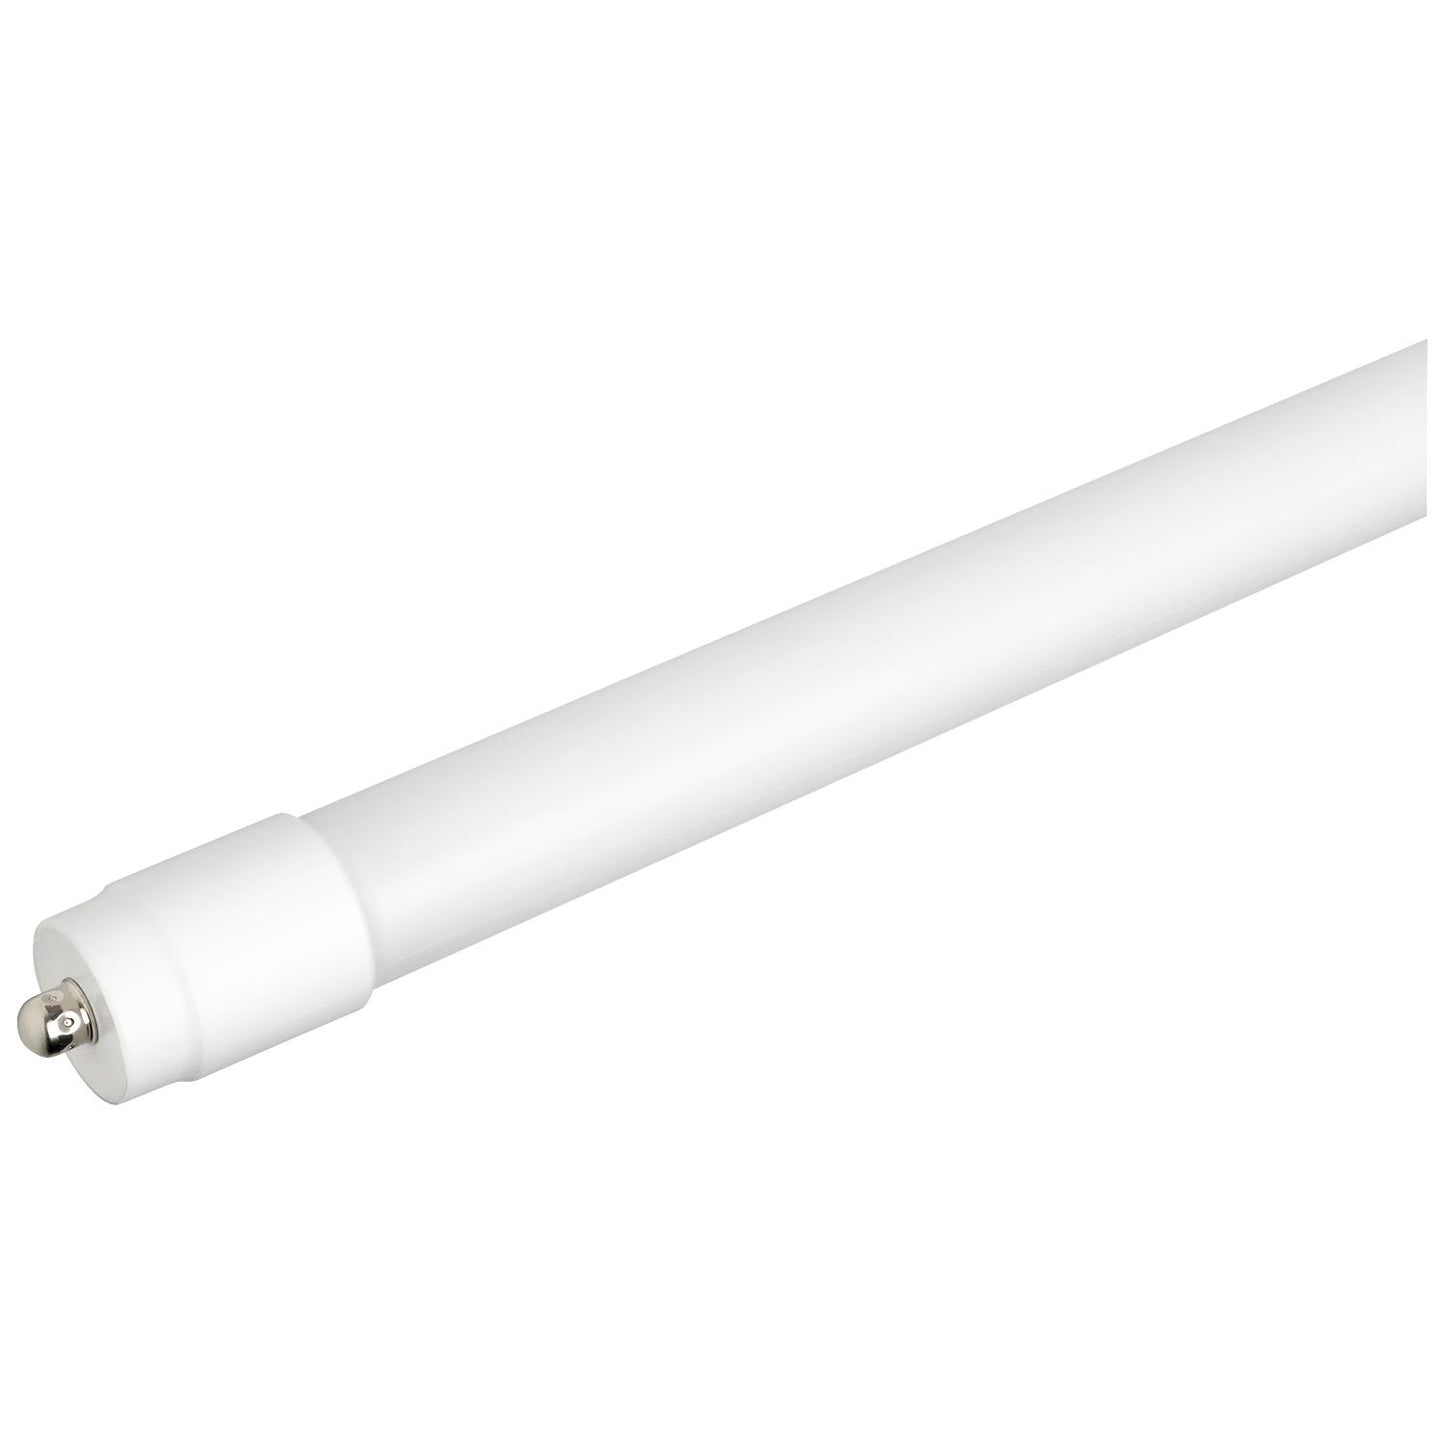 Sunlite T8/LED/ADV/8'/43W/50K LED T8 43W 8 Foot Bypass Dual End Single Pin Base, 5000K Super White with PET Coating